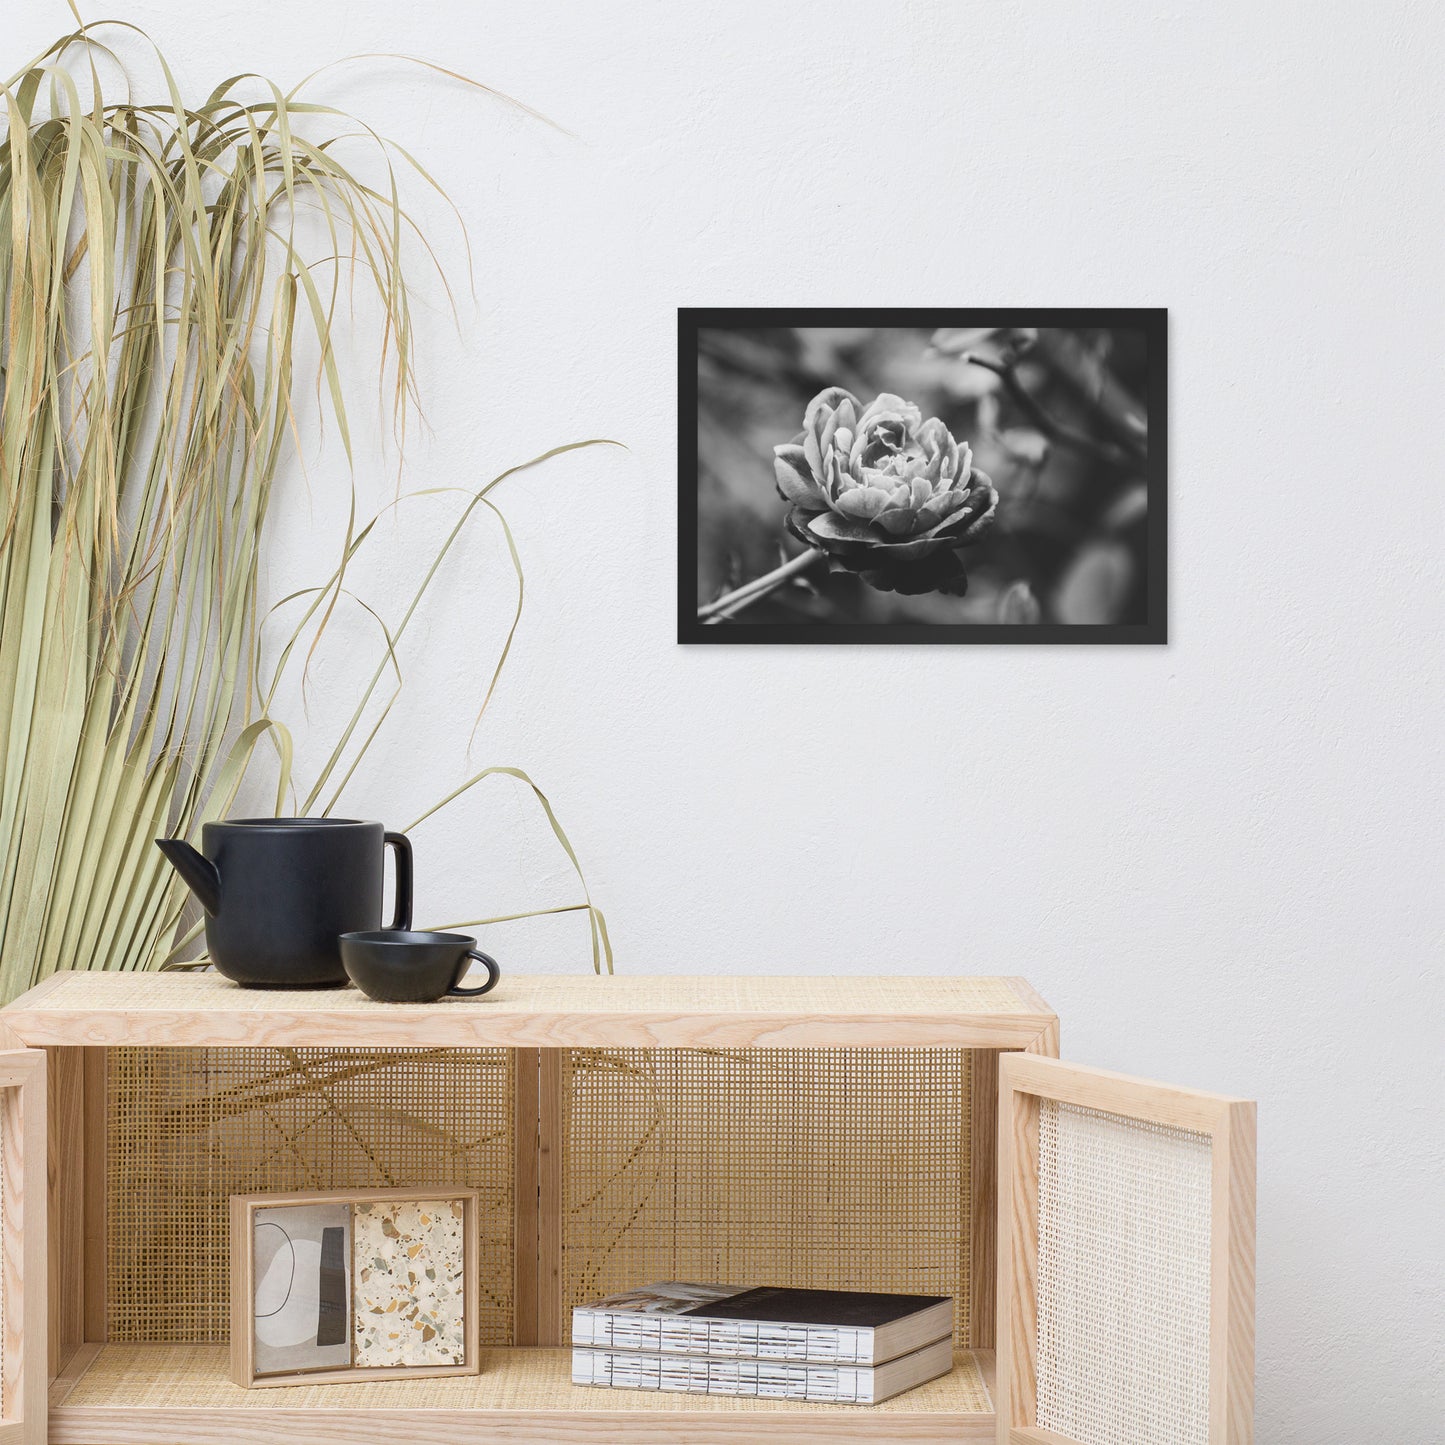 Perfect Petals Black and White Floral Nature Photo Framed Wall Art Print